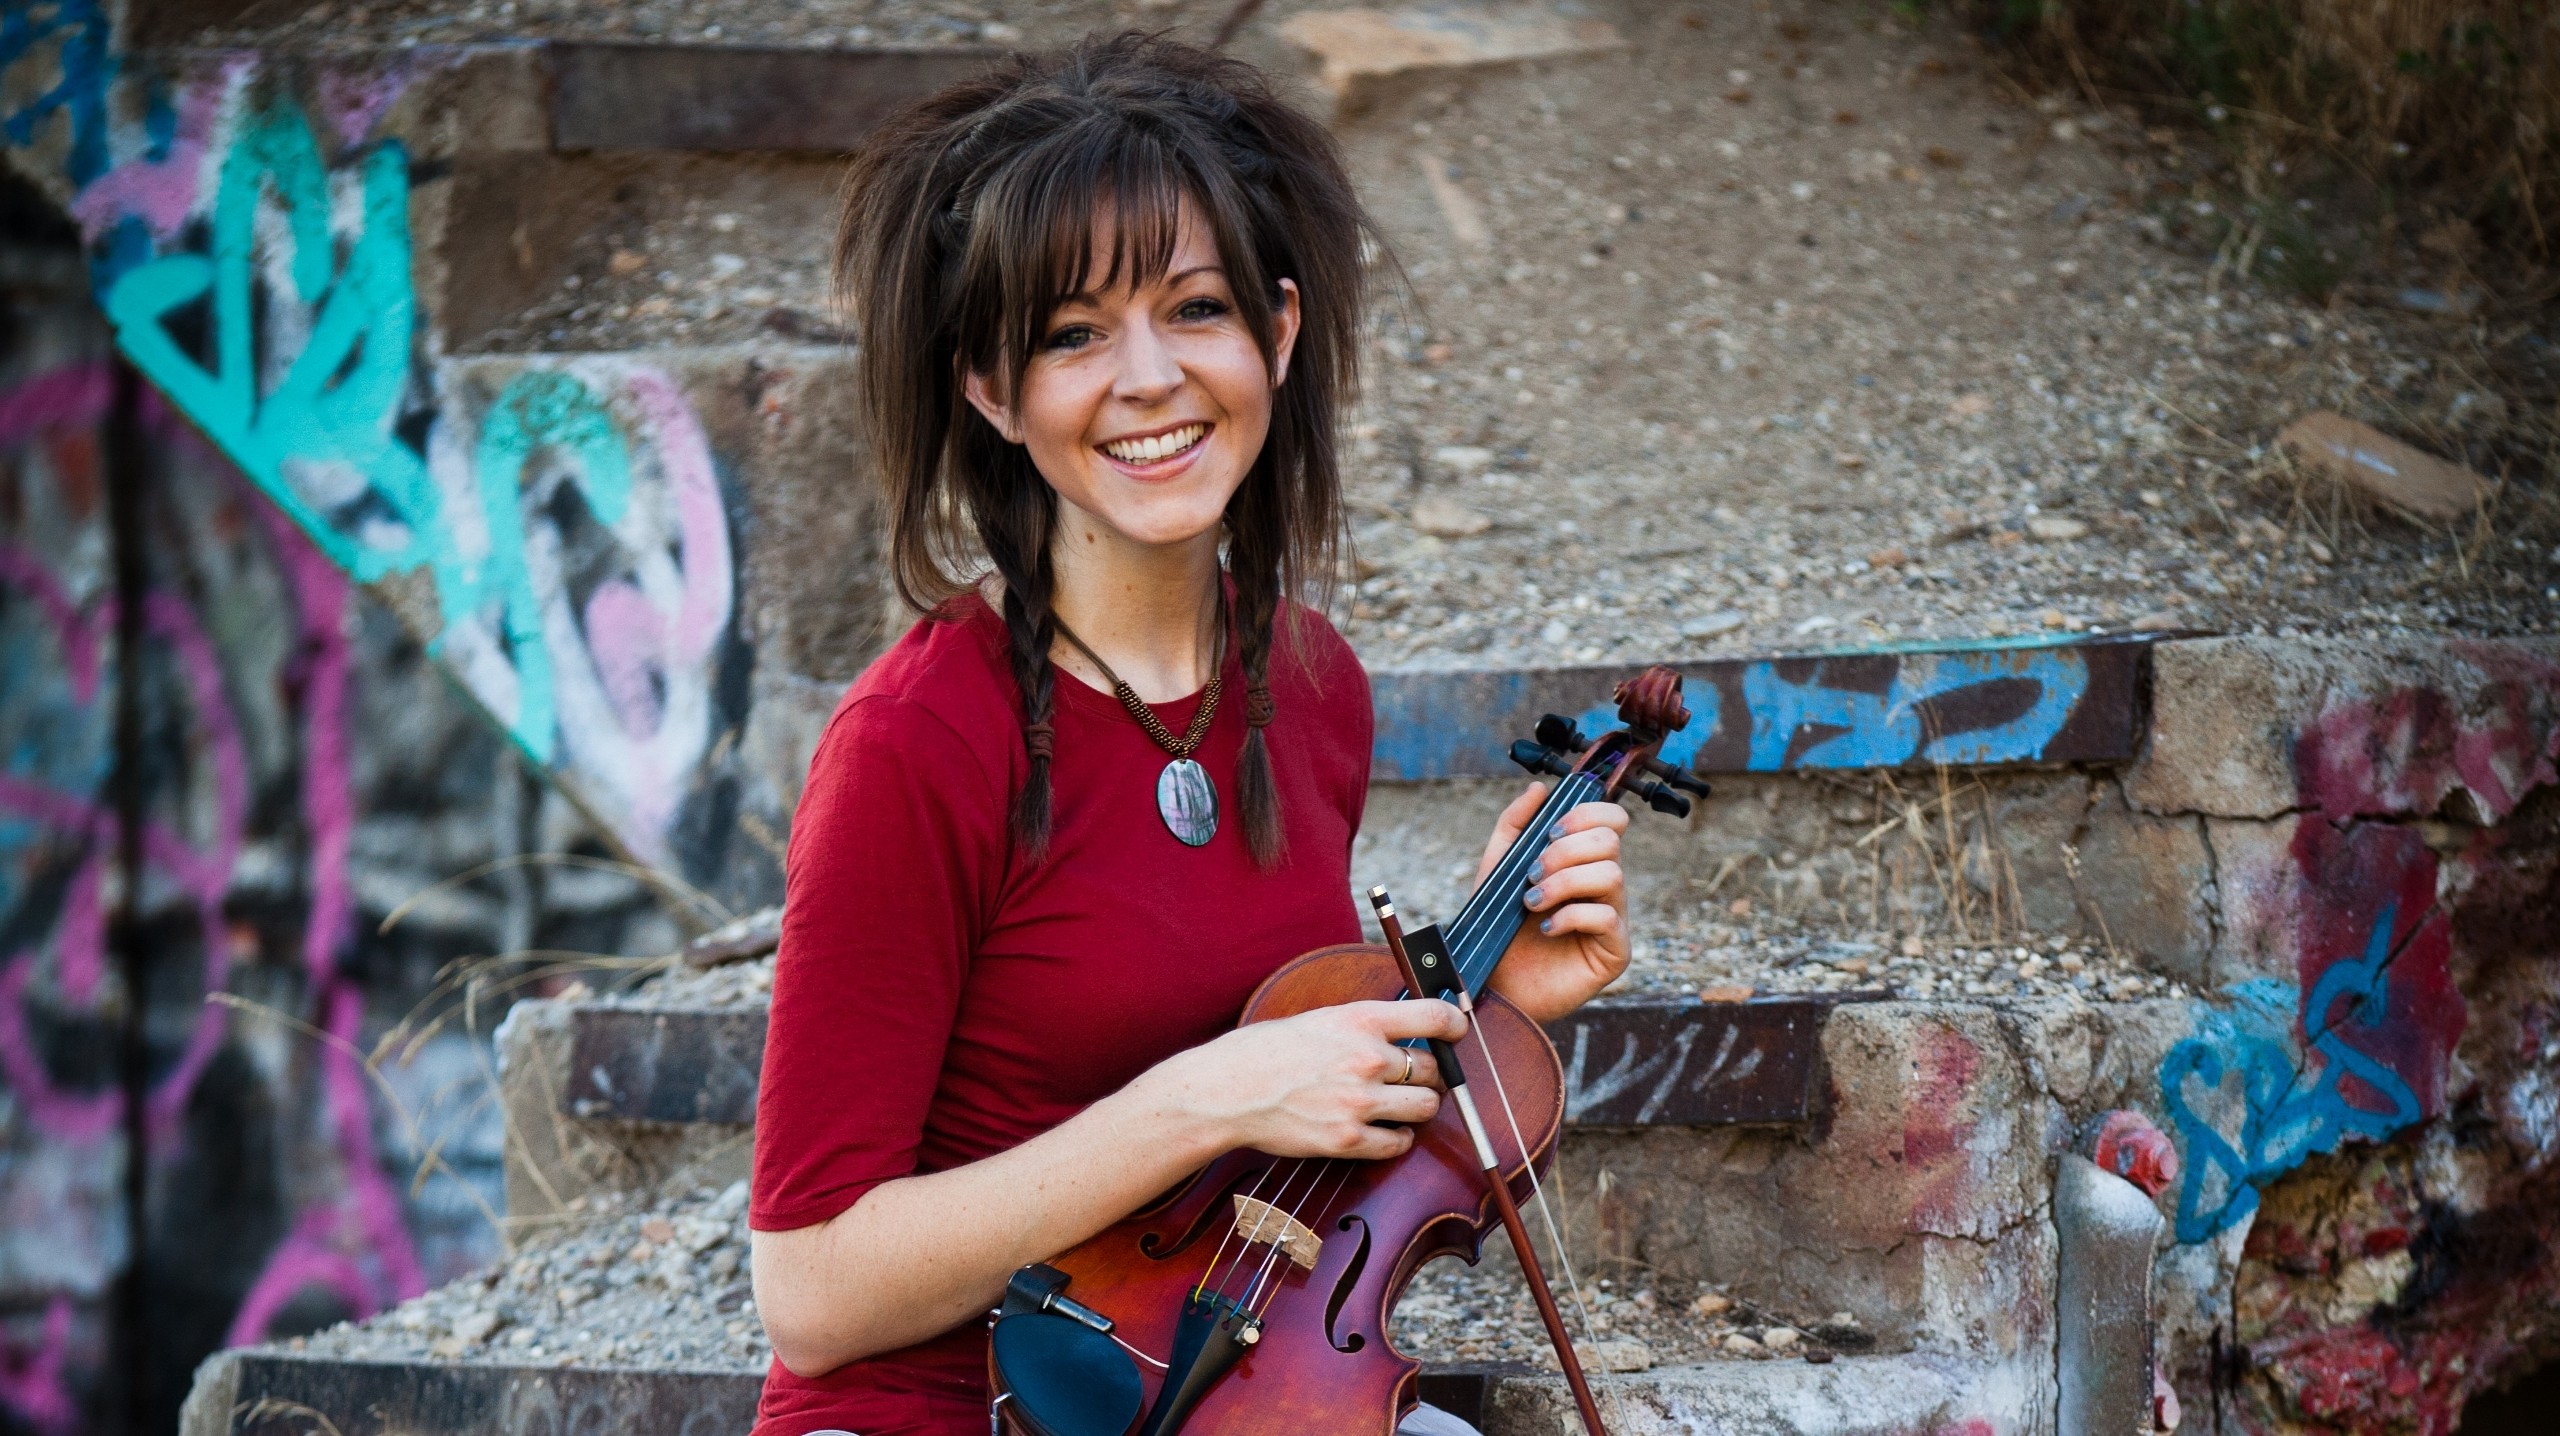 People 2560x1436 Lindsey Stirling women violin musician musical instrument smiling brunette women outdoors outdoors